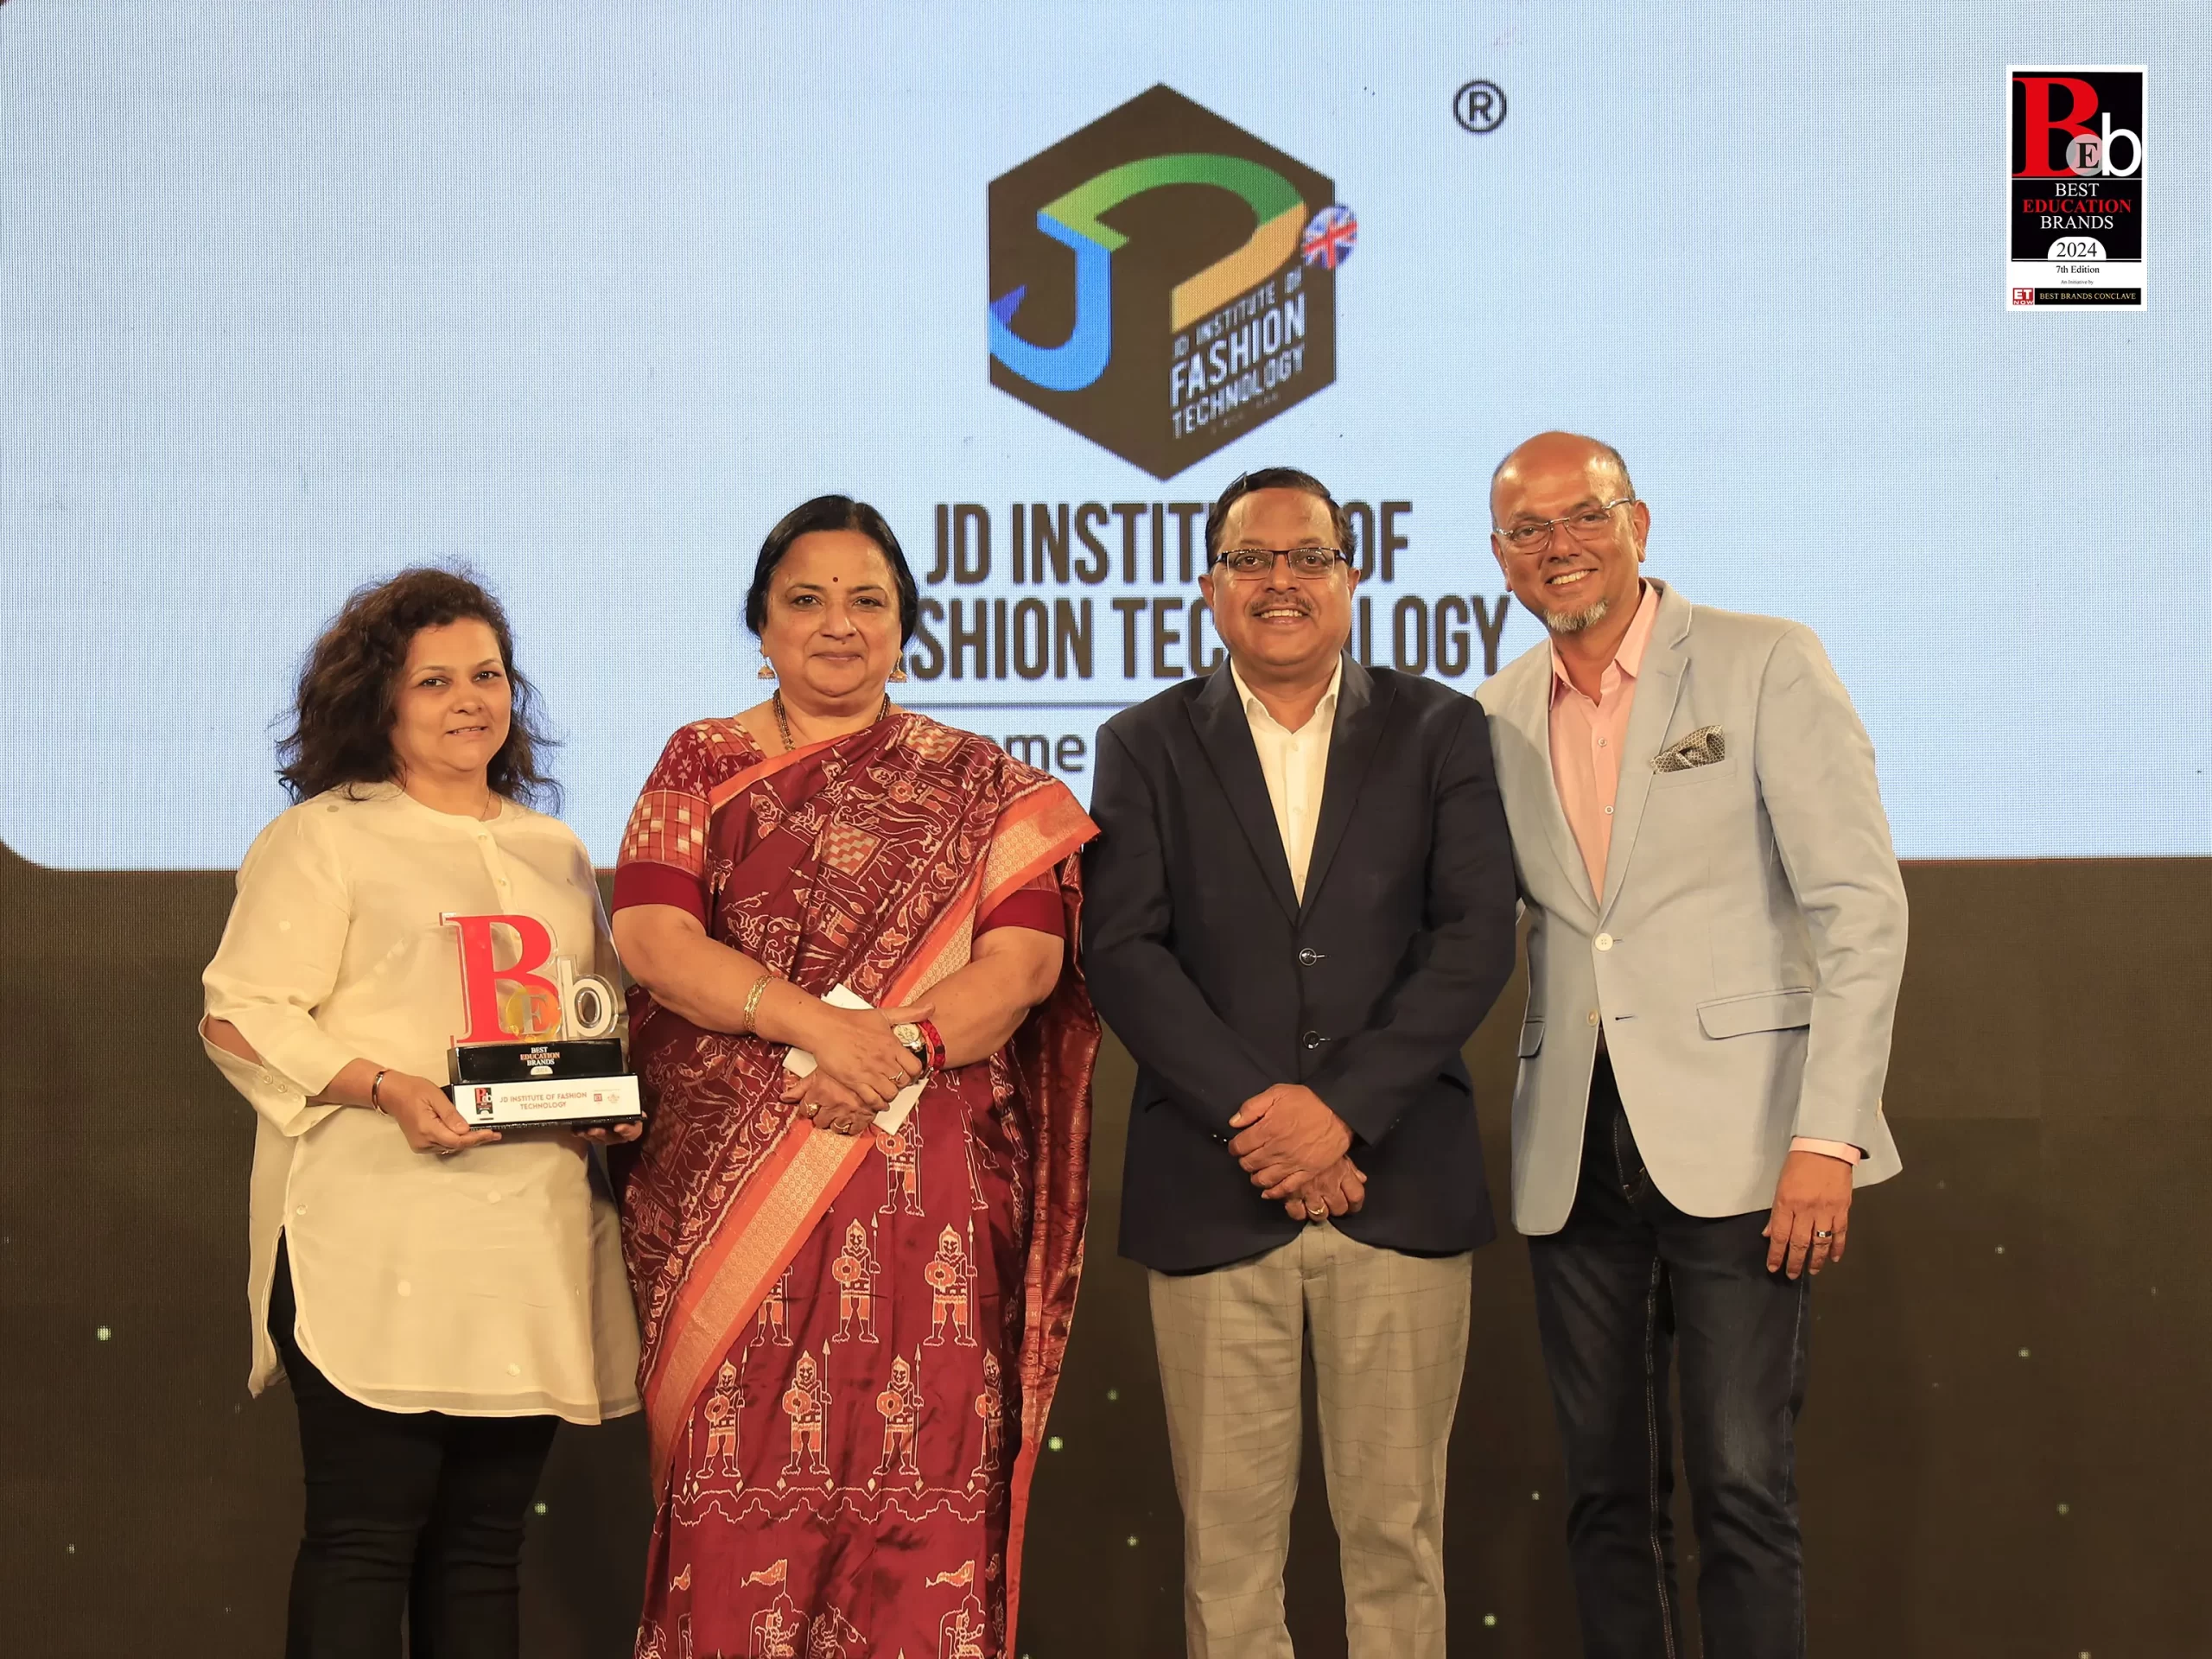 JD Institute of Fashion Technology is recognised as a Best Education Brand by ET Now (2) jd institute of fashion technology - JD Institute of Fashion Technology is recognised as a Best Education Brand by ET Now 2 scaled - JD Institute of Fashion Technology is recognised as a Best Education Brand by ET Now